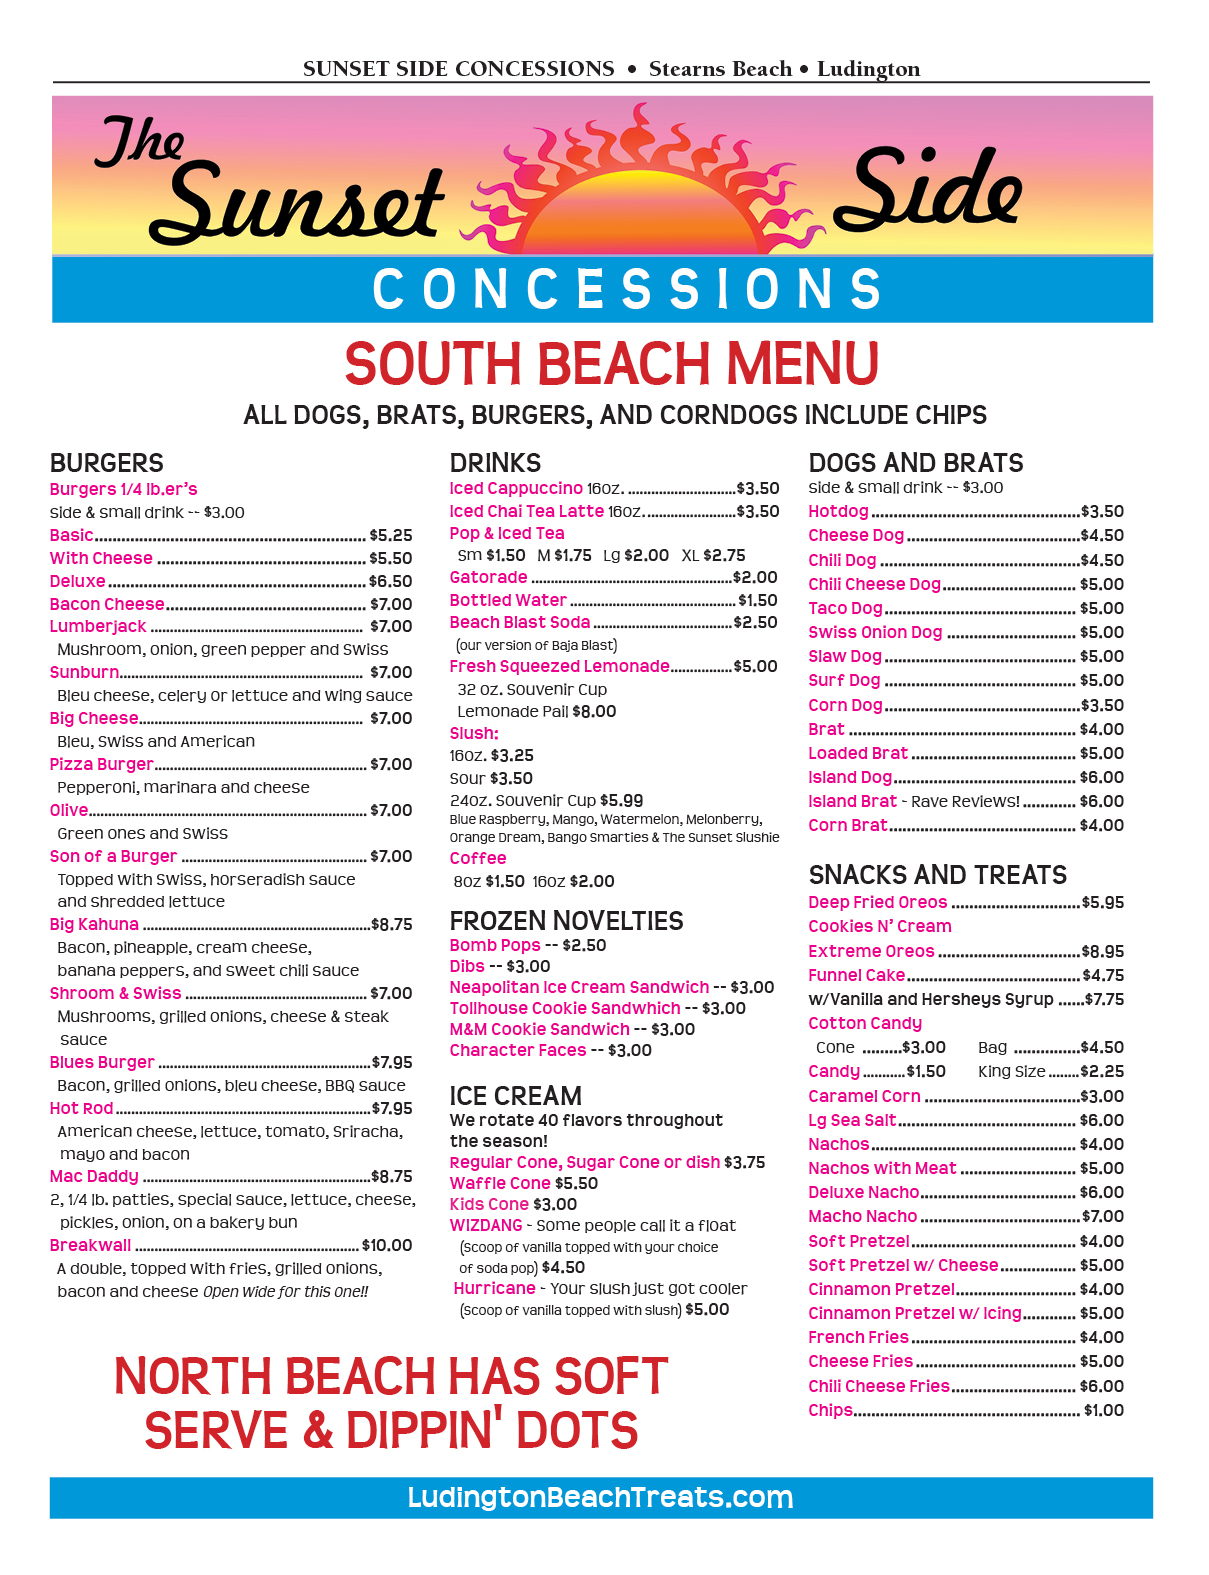 Menu for Sunset Side Concessions at Stearns Park Beach in Ludington from the Lakeshore Menu Guide